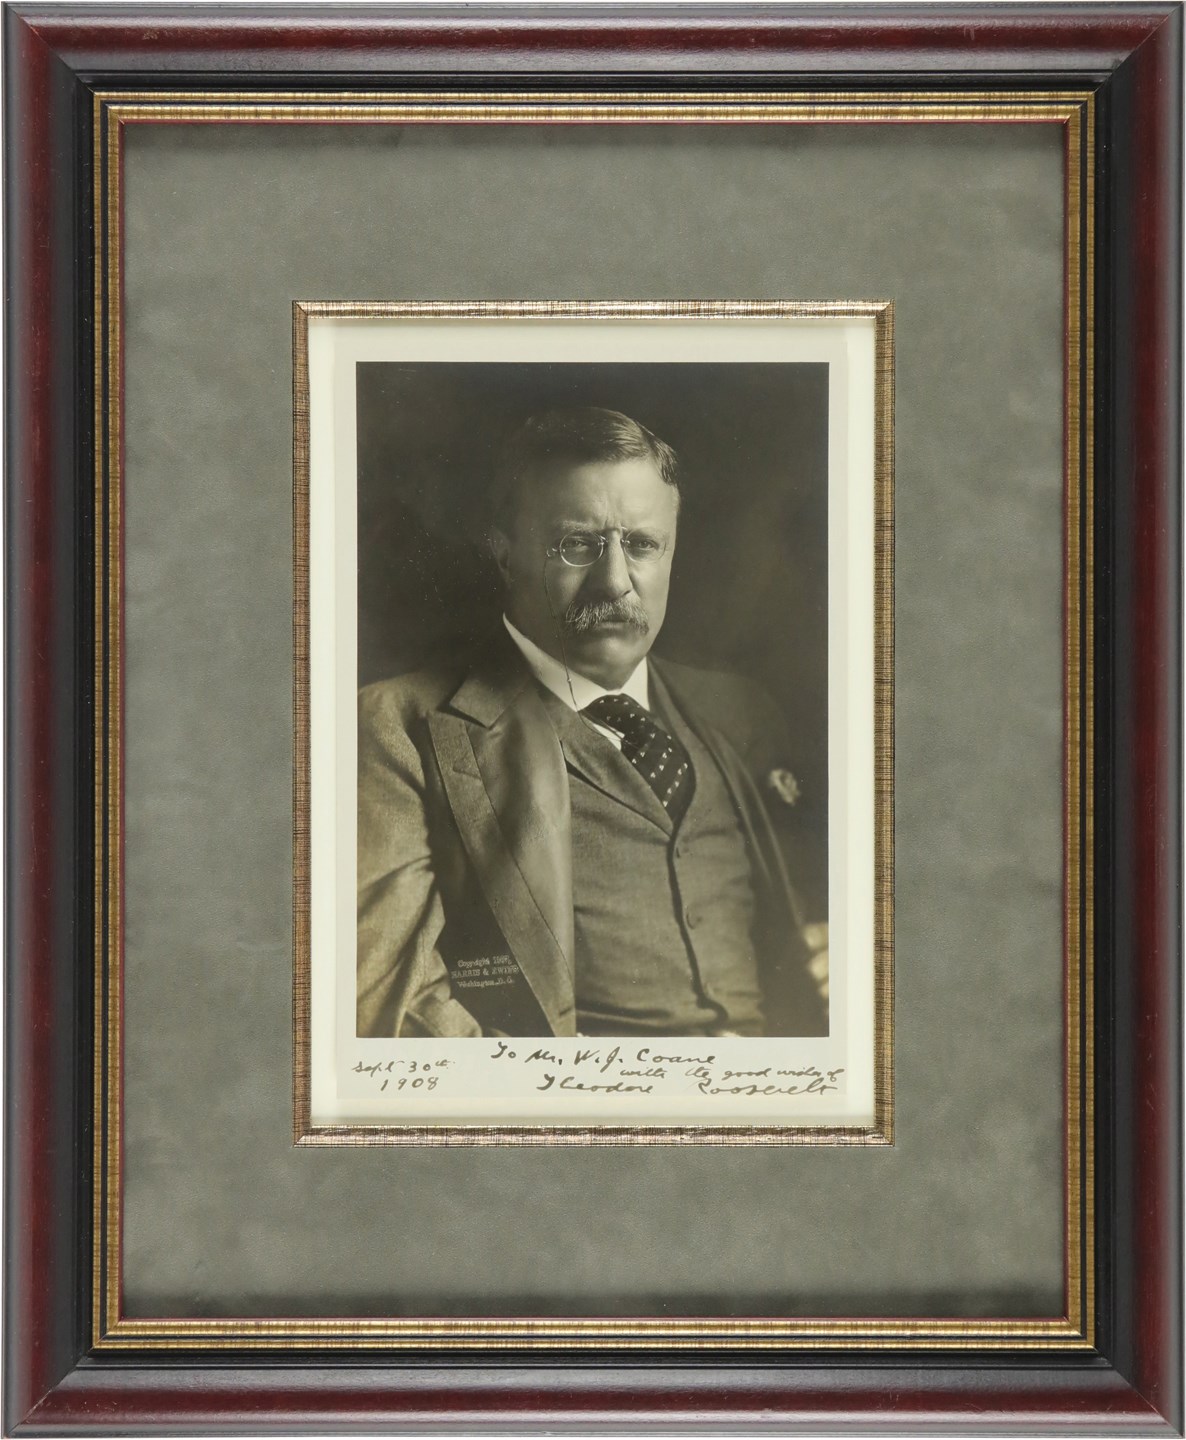 - Gorgeous 1908 Theodore Roosevelt Signed Photograph as President (PSA)